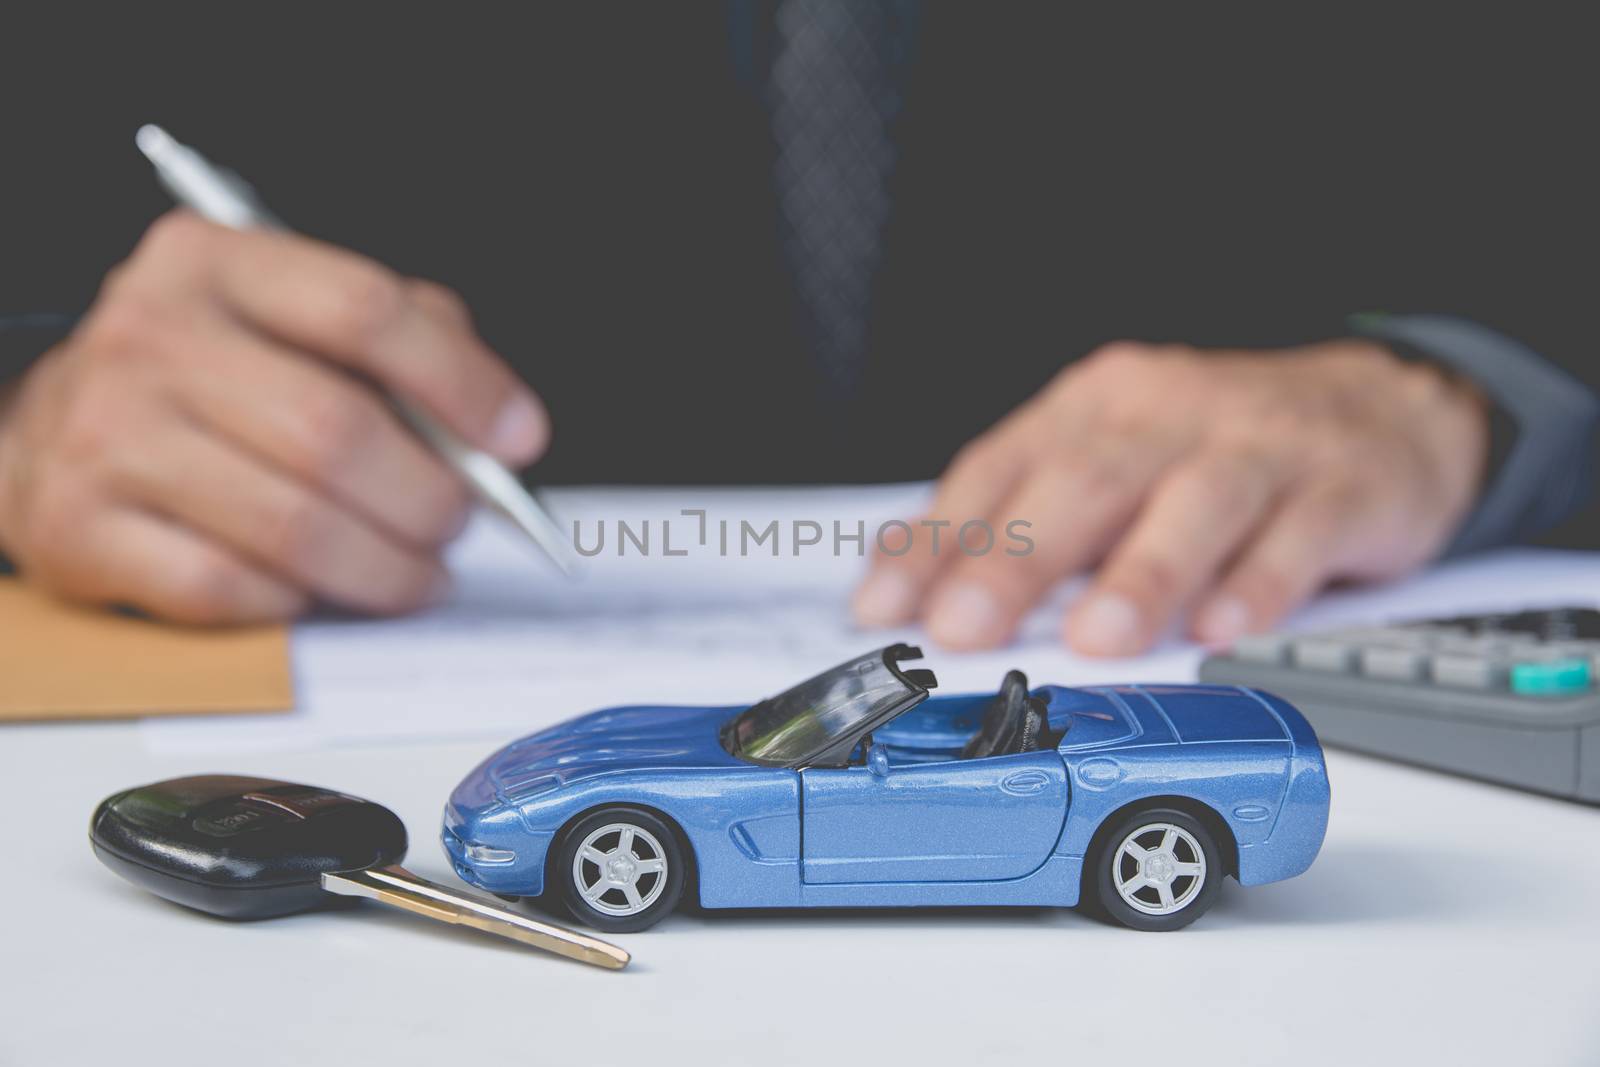 Car insurance and car services concept. Business concept. Car in by kirisa99